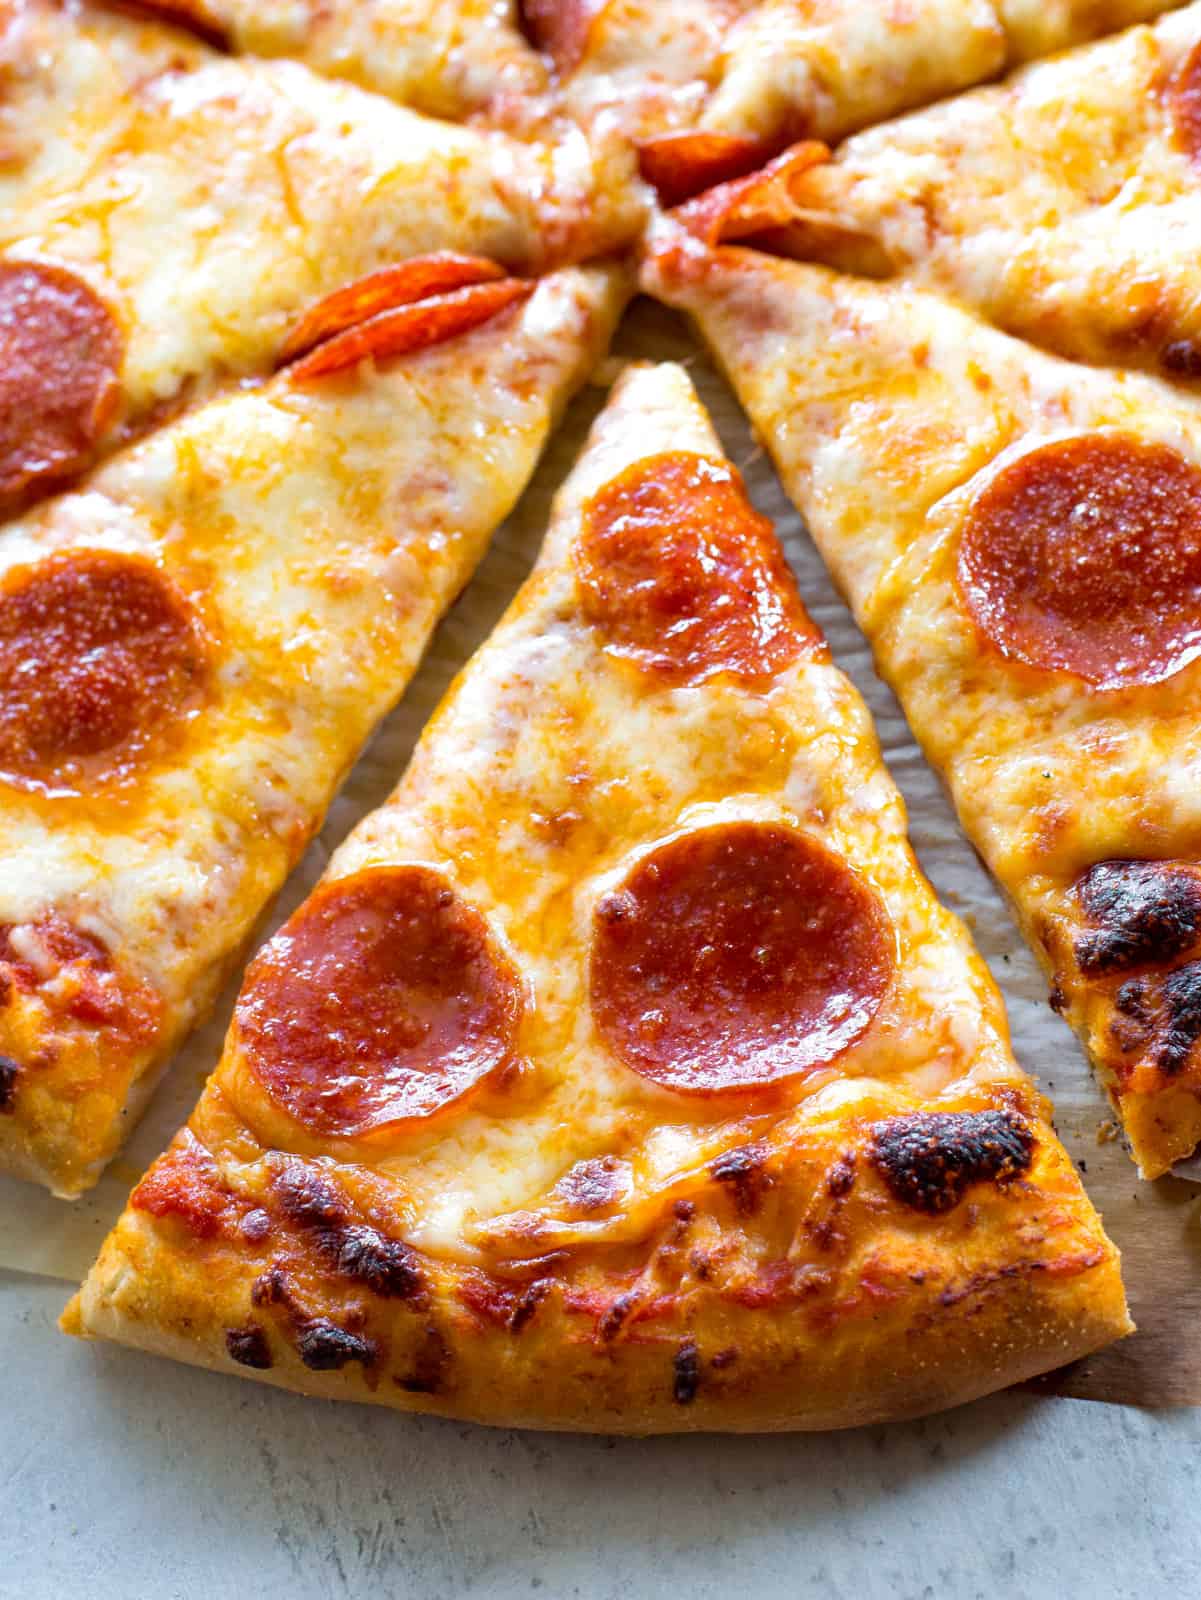 Homemade Pizza Recipes For When You Don't Want Delivery